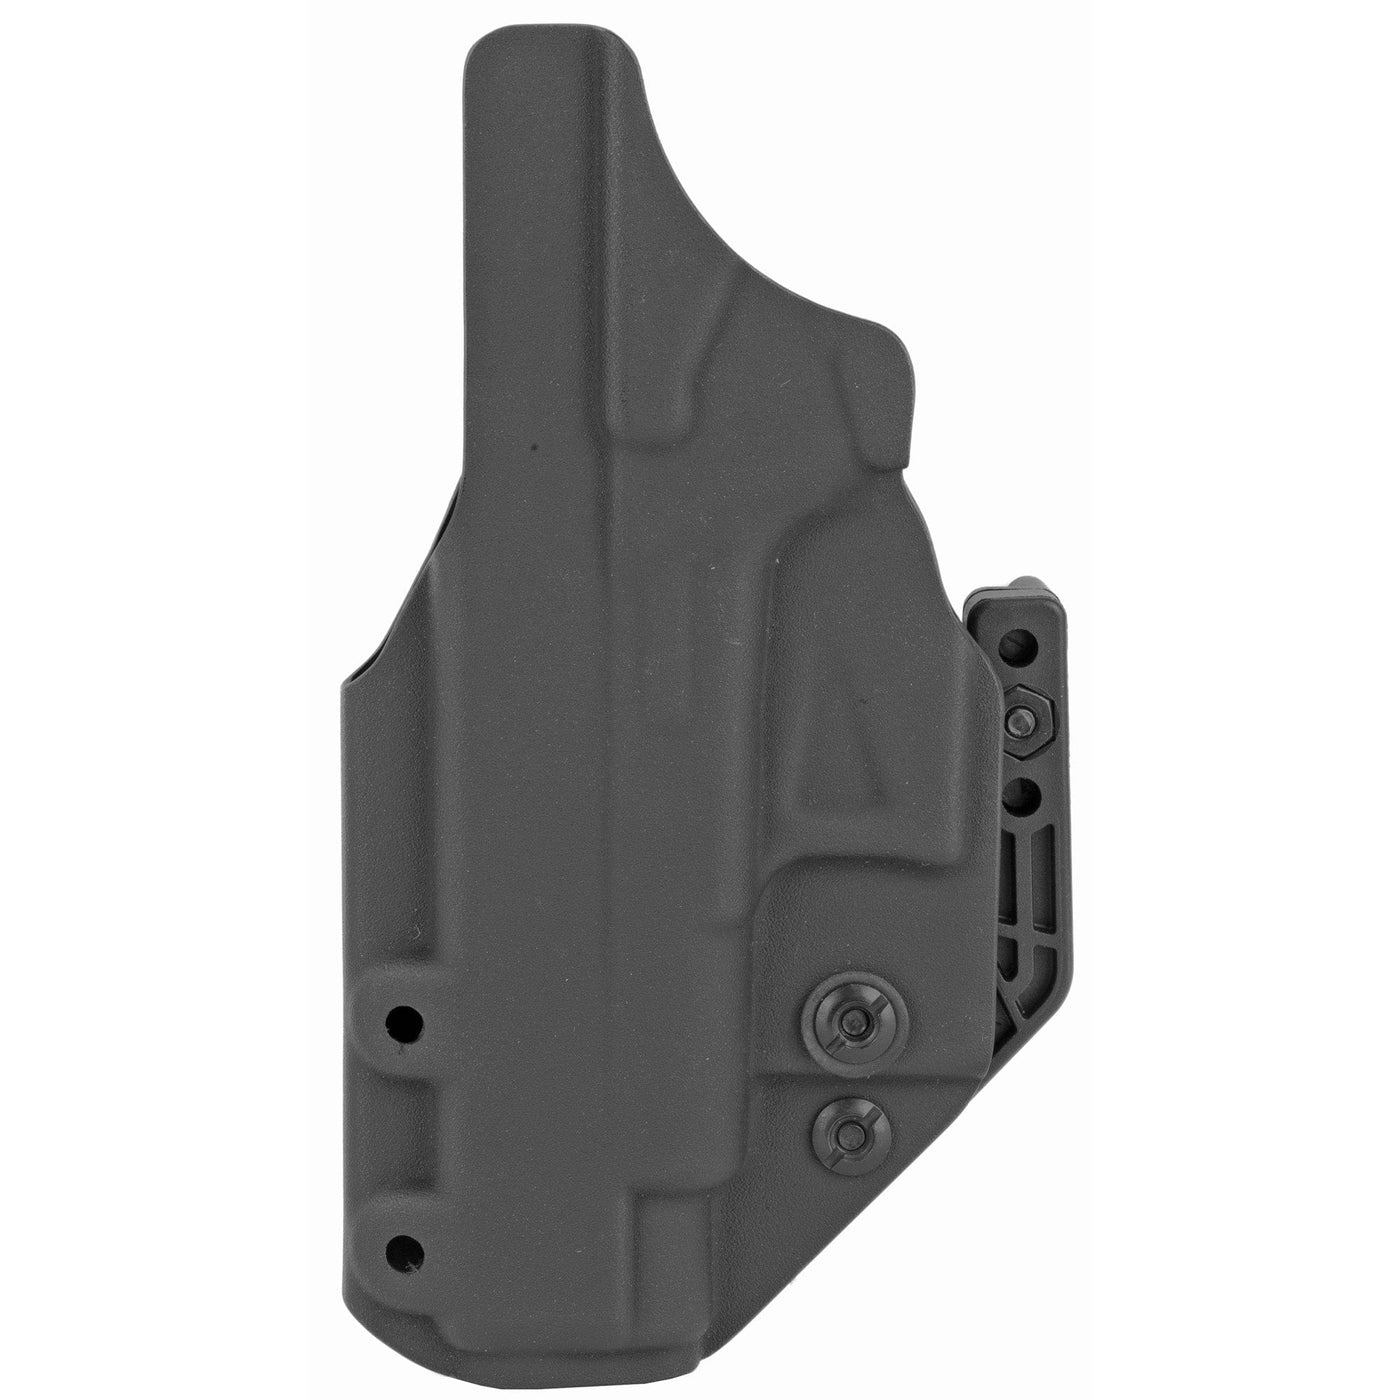 L.A.G. Tactical, Inc. Lag Apd Mk Ii For Glock 48 Blk Rh Holsters